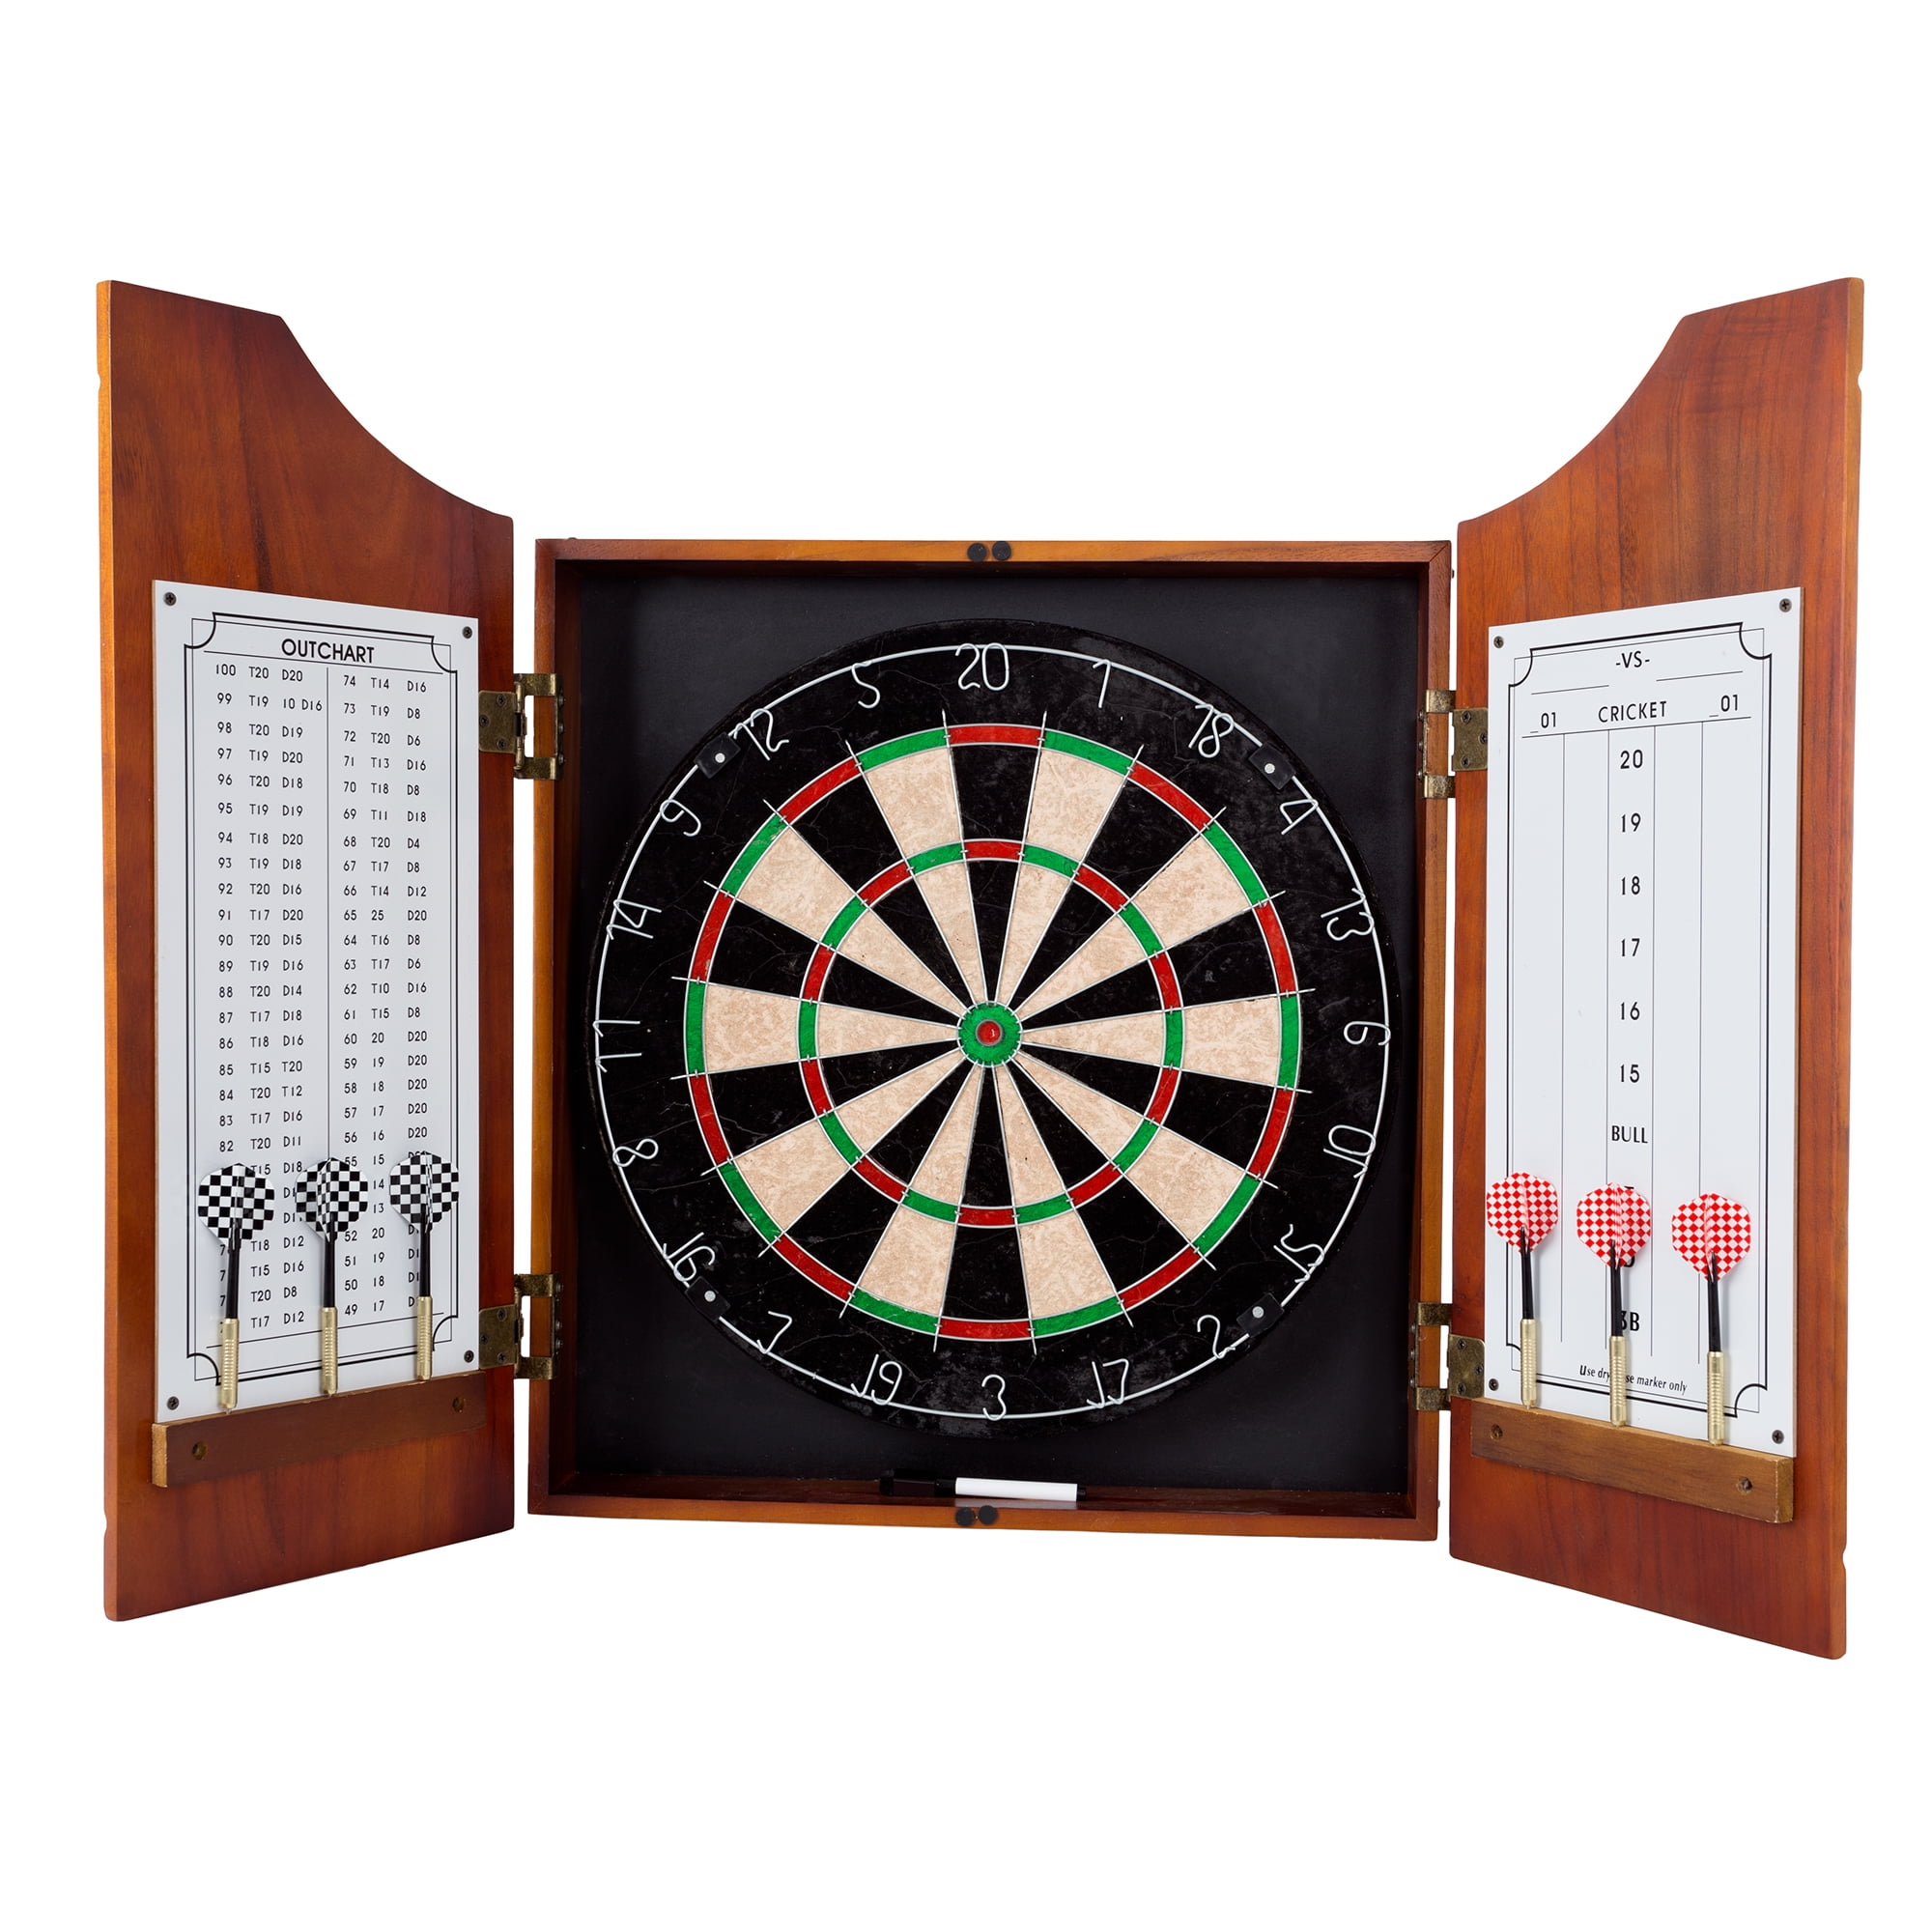 Dart Board Cabinet Set - Steel-Tip Dart Board Adult Game Bar Set for Room  Decor, Man Caves, and Backyard Games - by Trademark Games